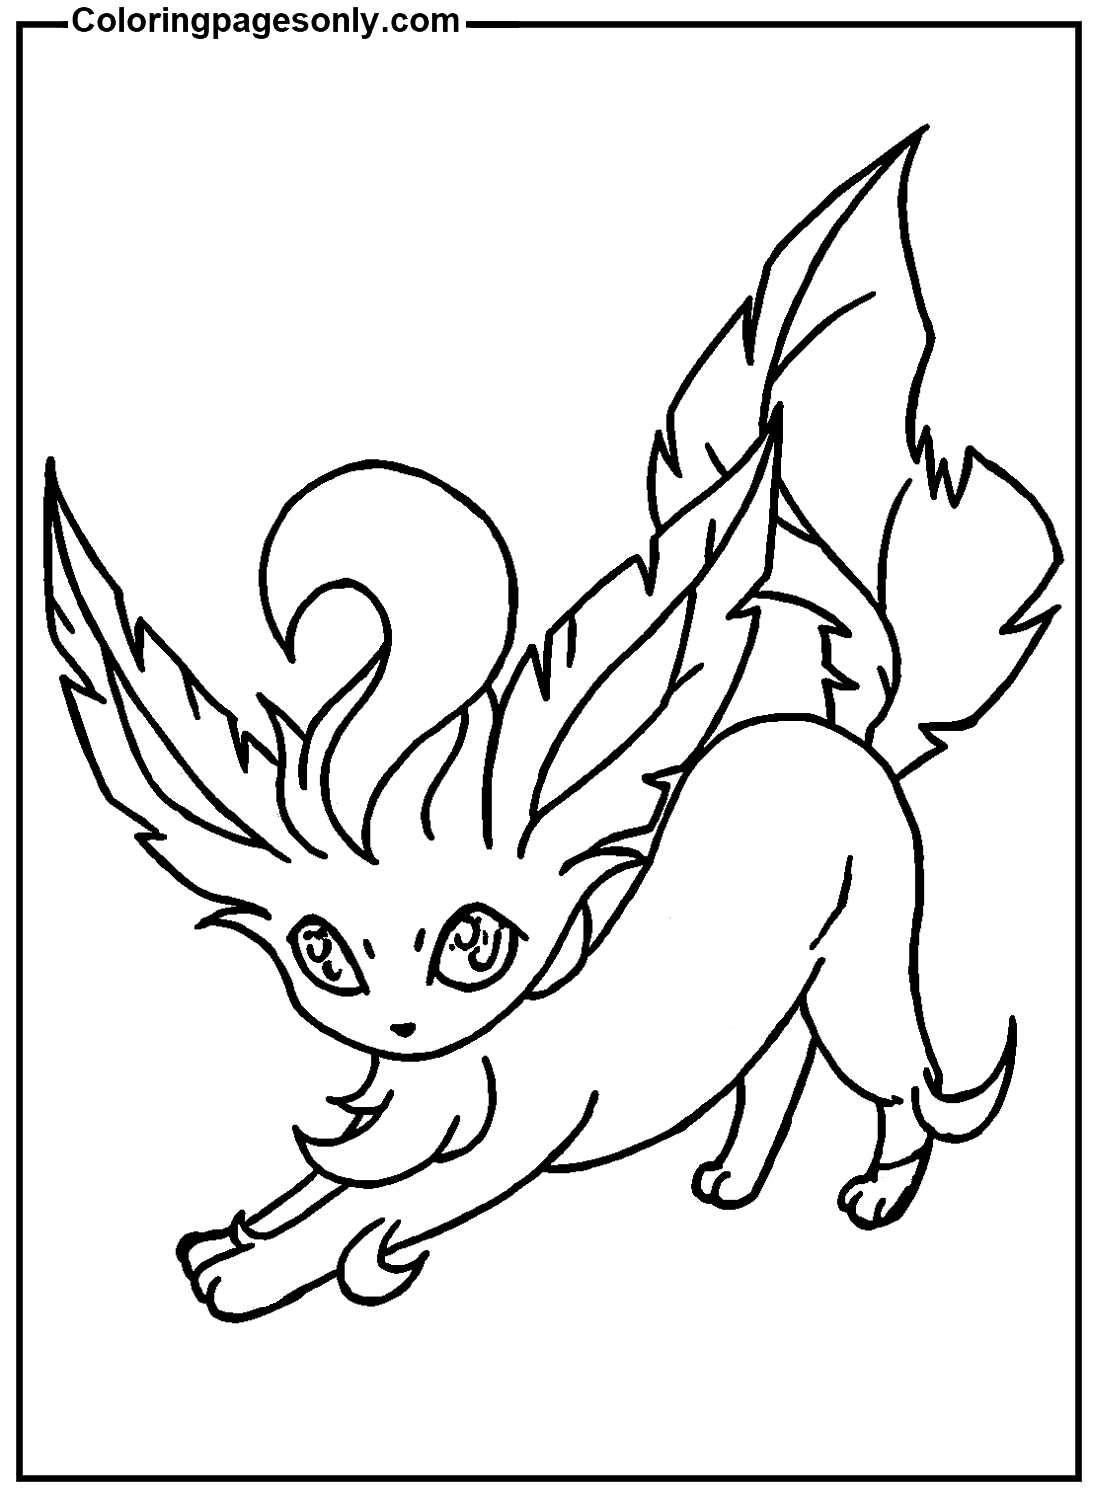 Pokemon Leafeon Image from Leafeon